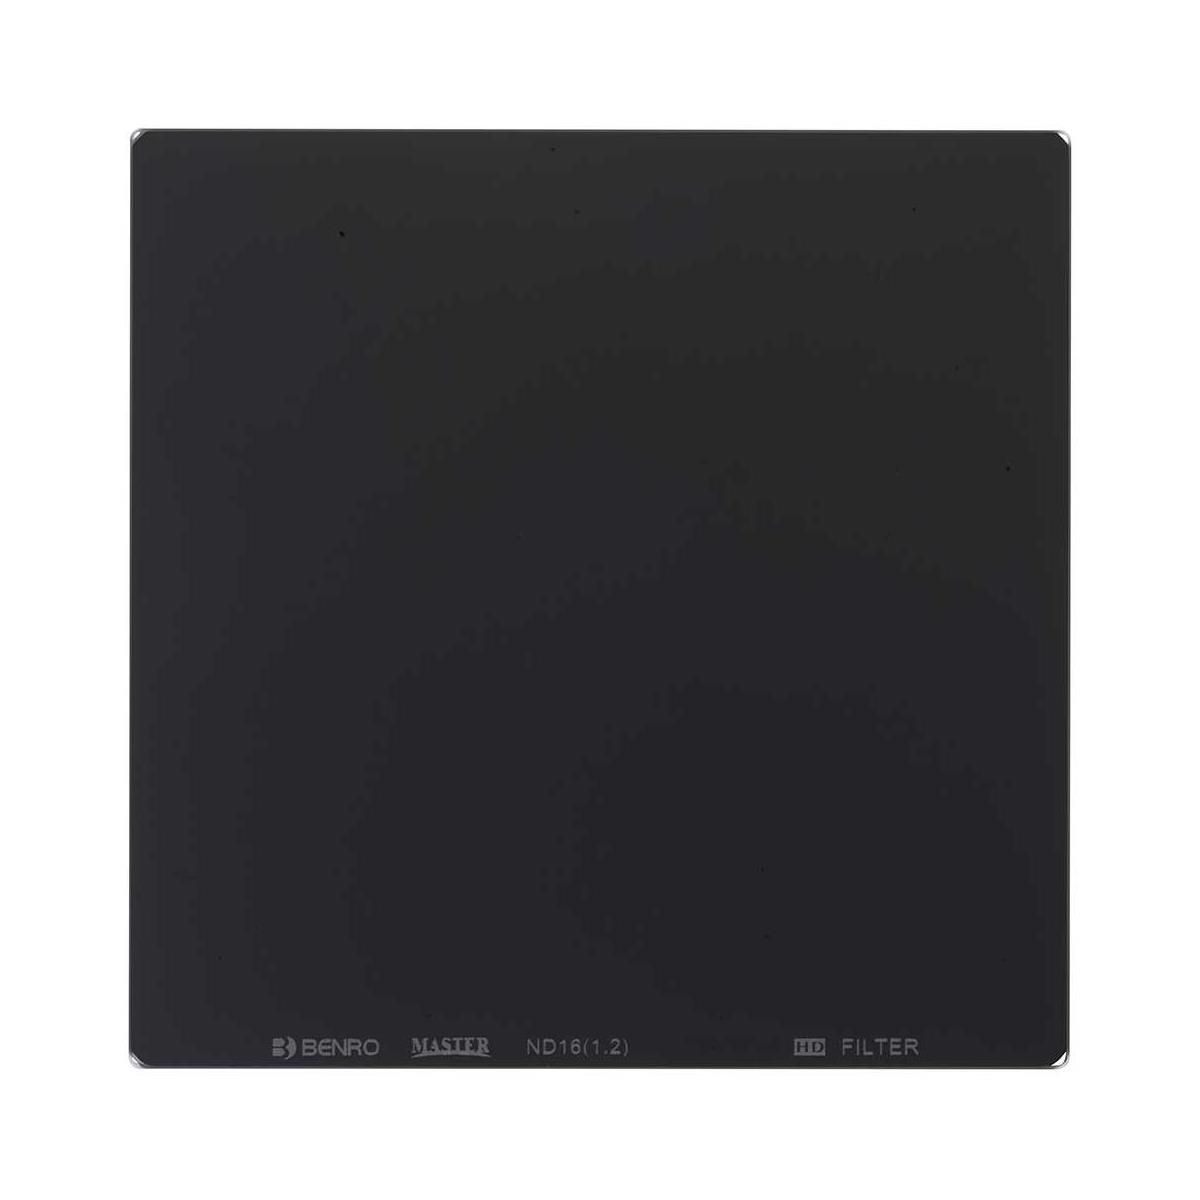 Image of Benro Master ND16 (1.2) 170x170mm Neutral Density Square Filter